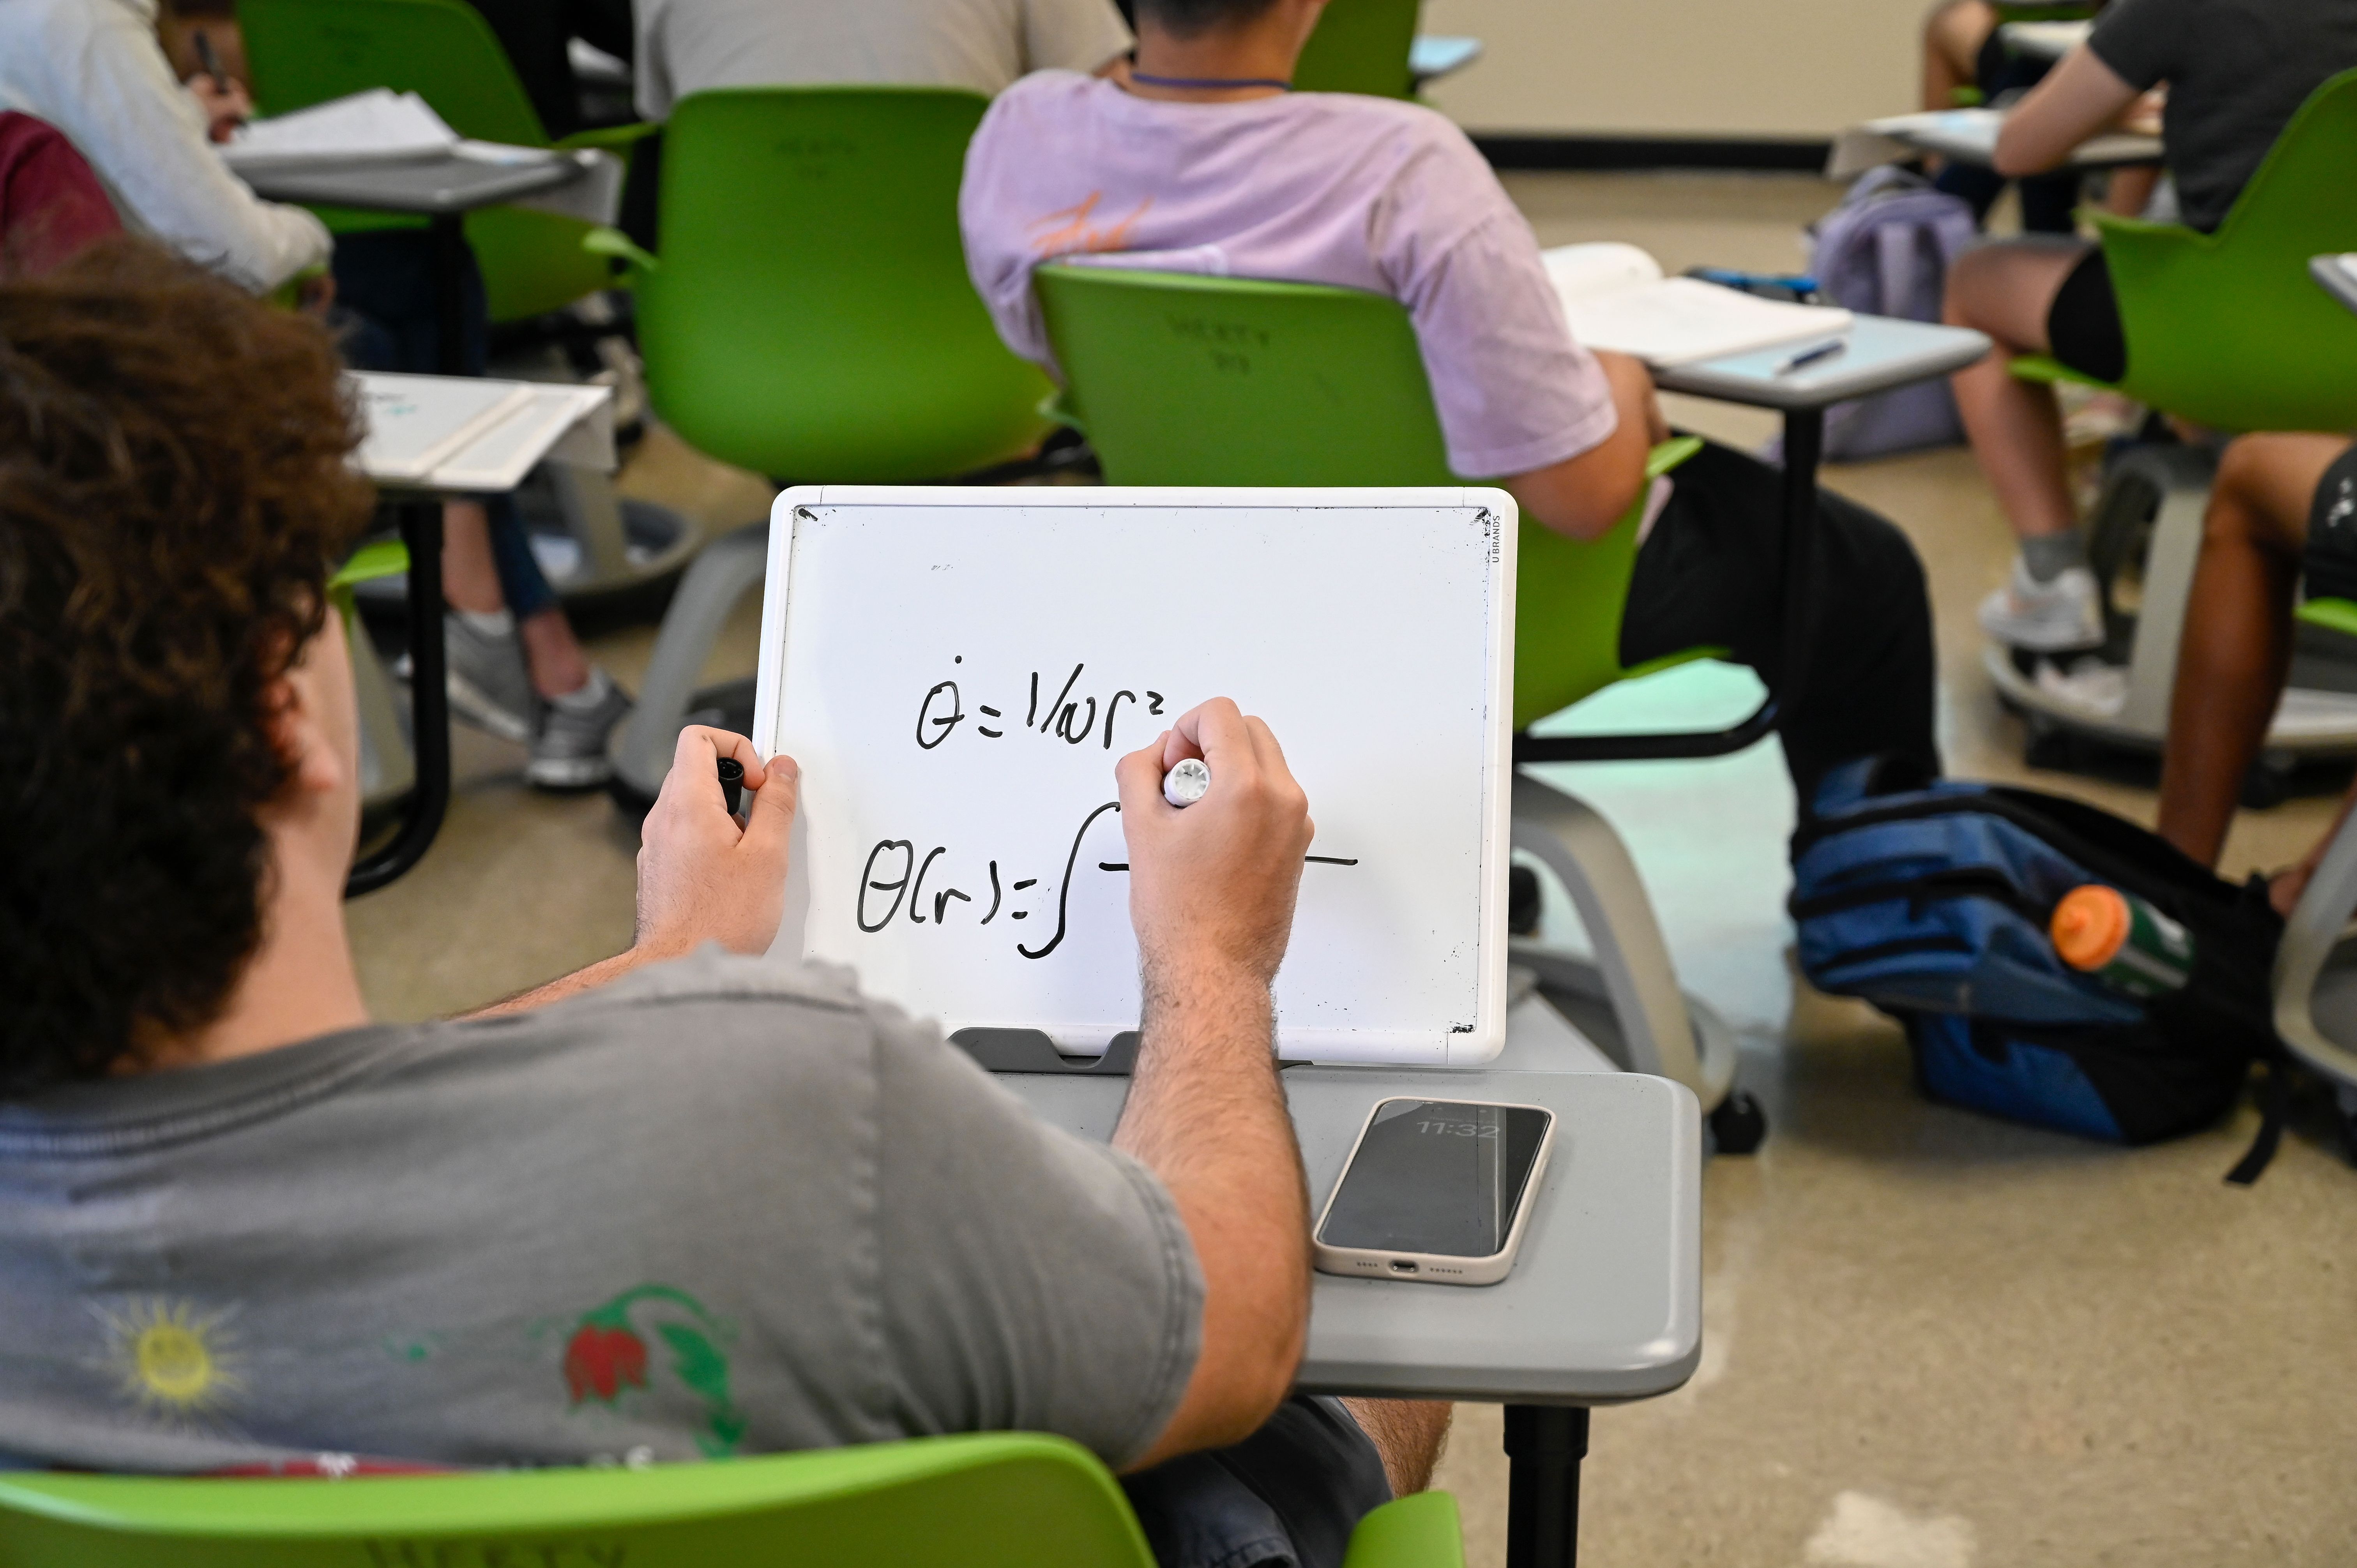 Over shoulder view of a SSP student drawing an equation on a wipey board.